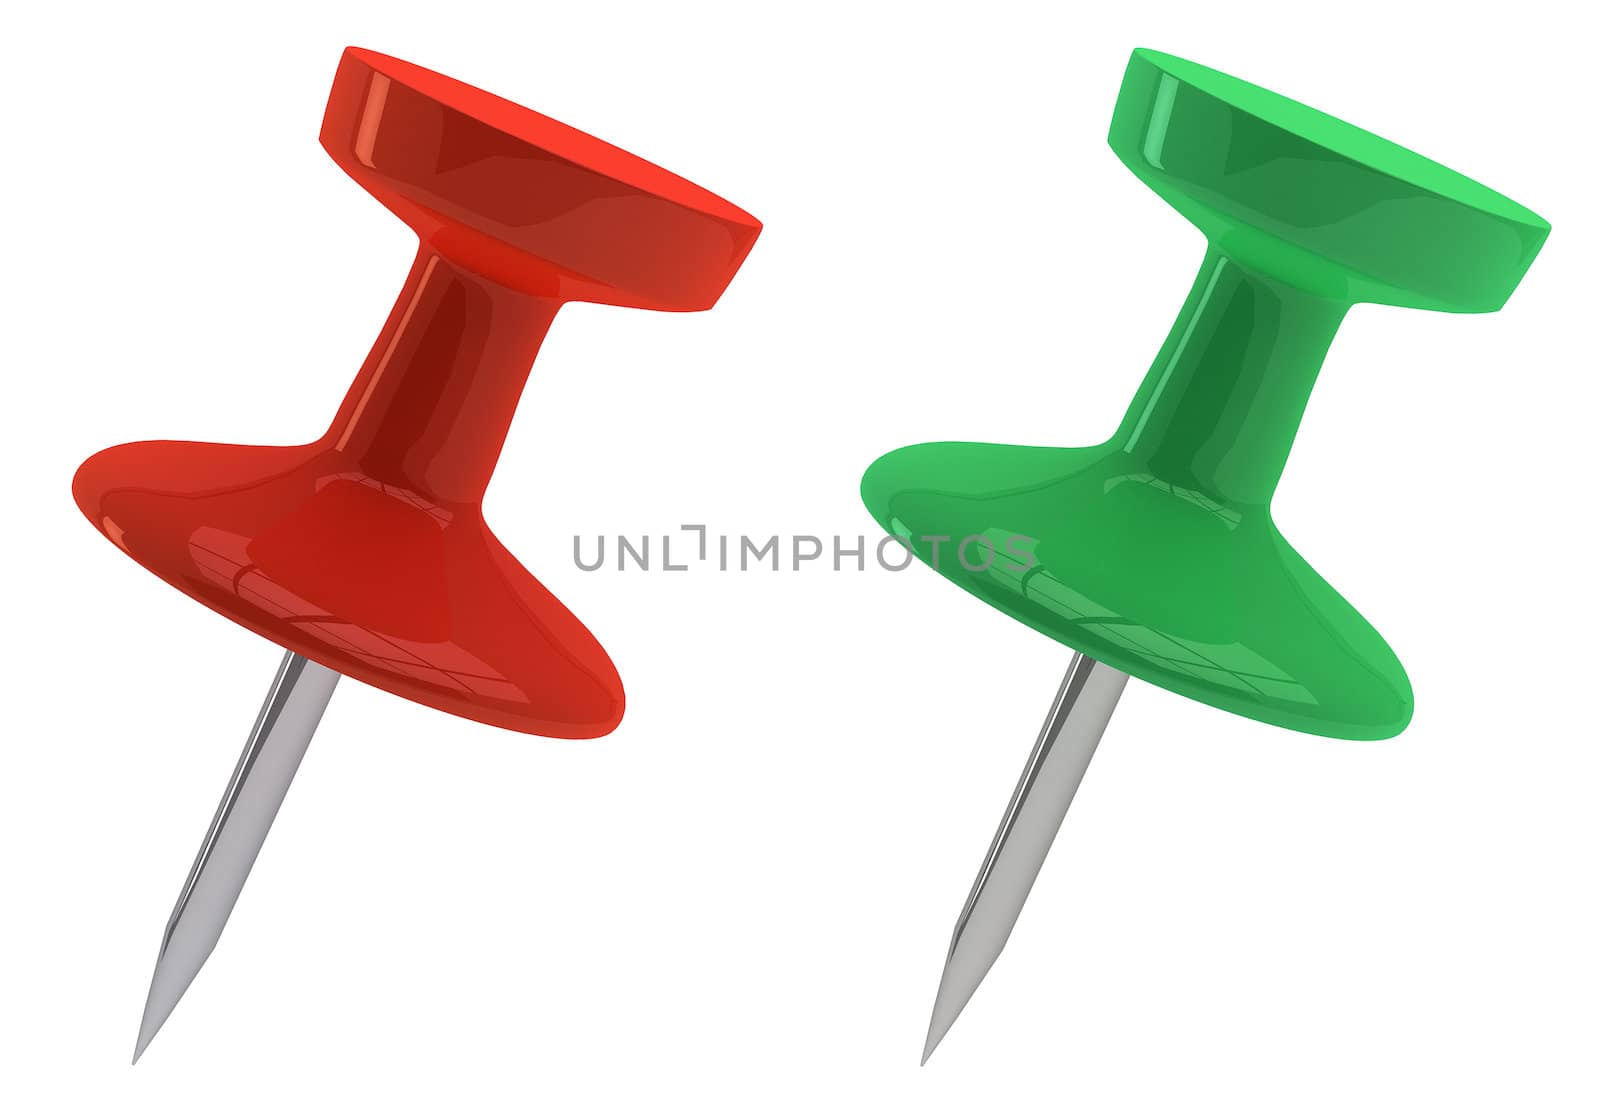 Red and green pushpins by gorgrigo